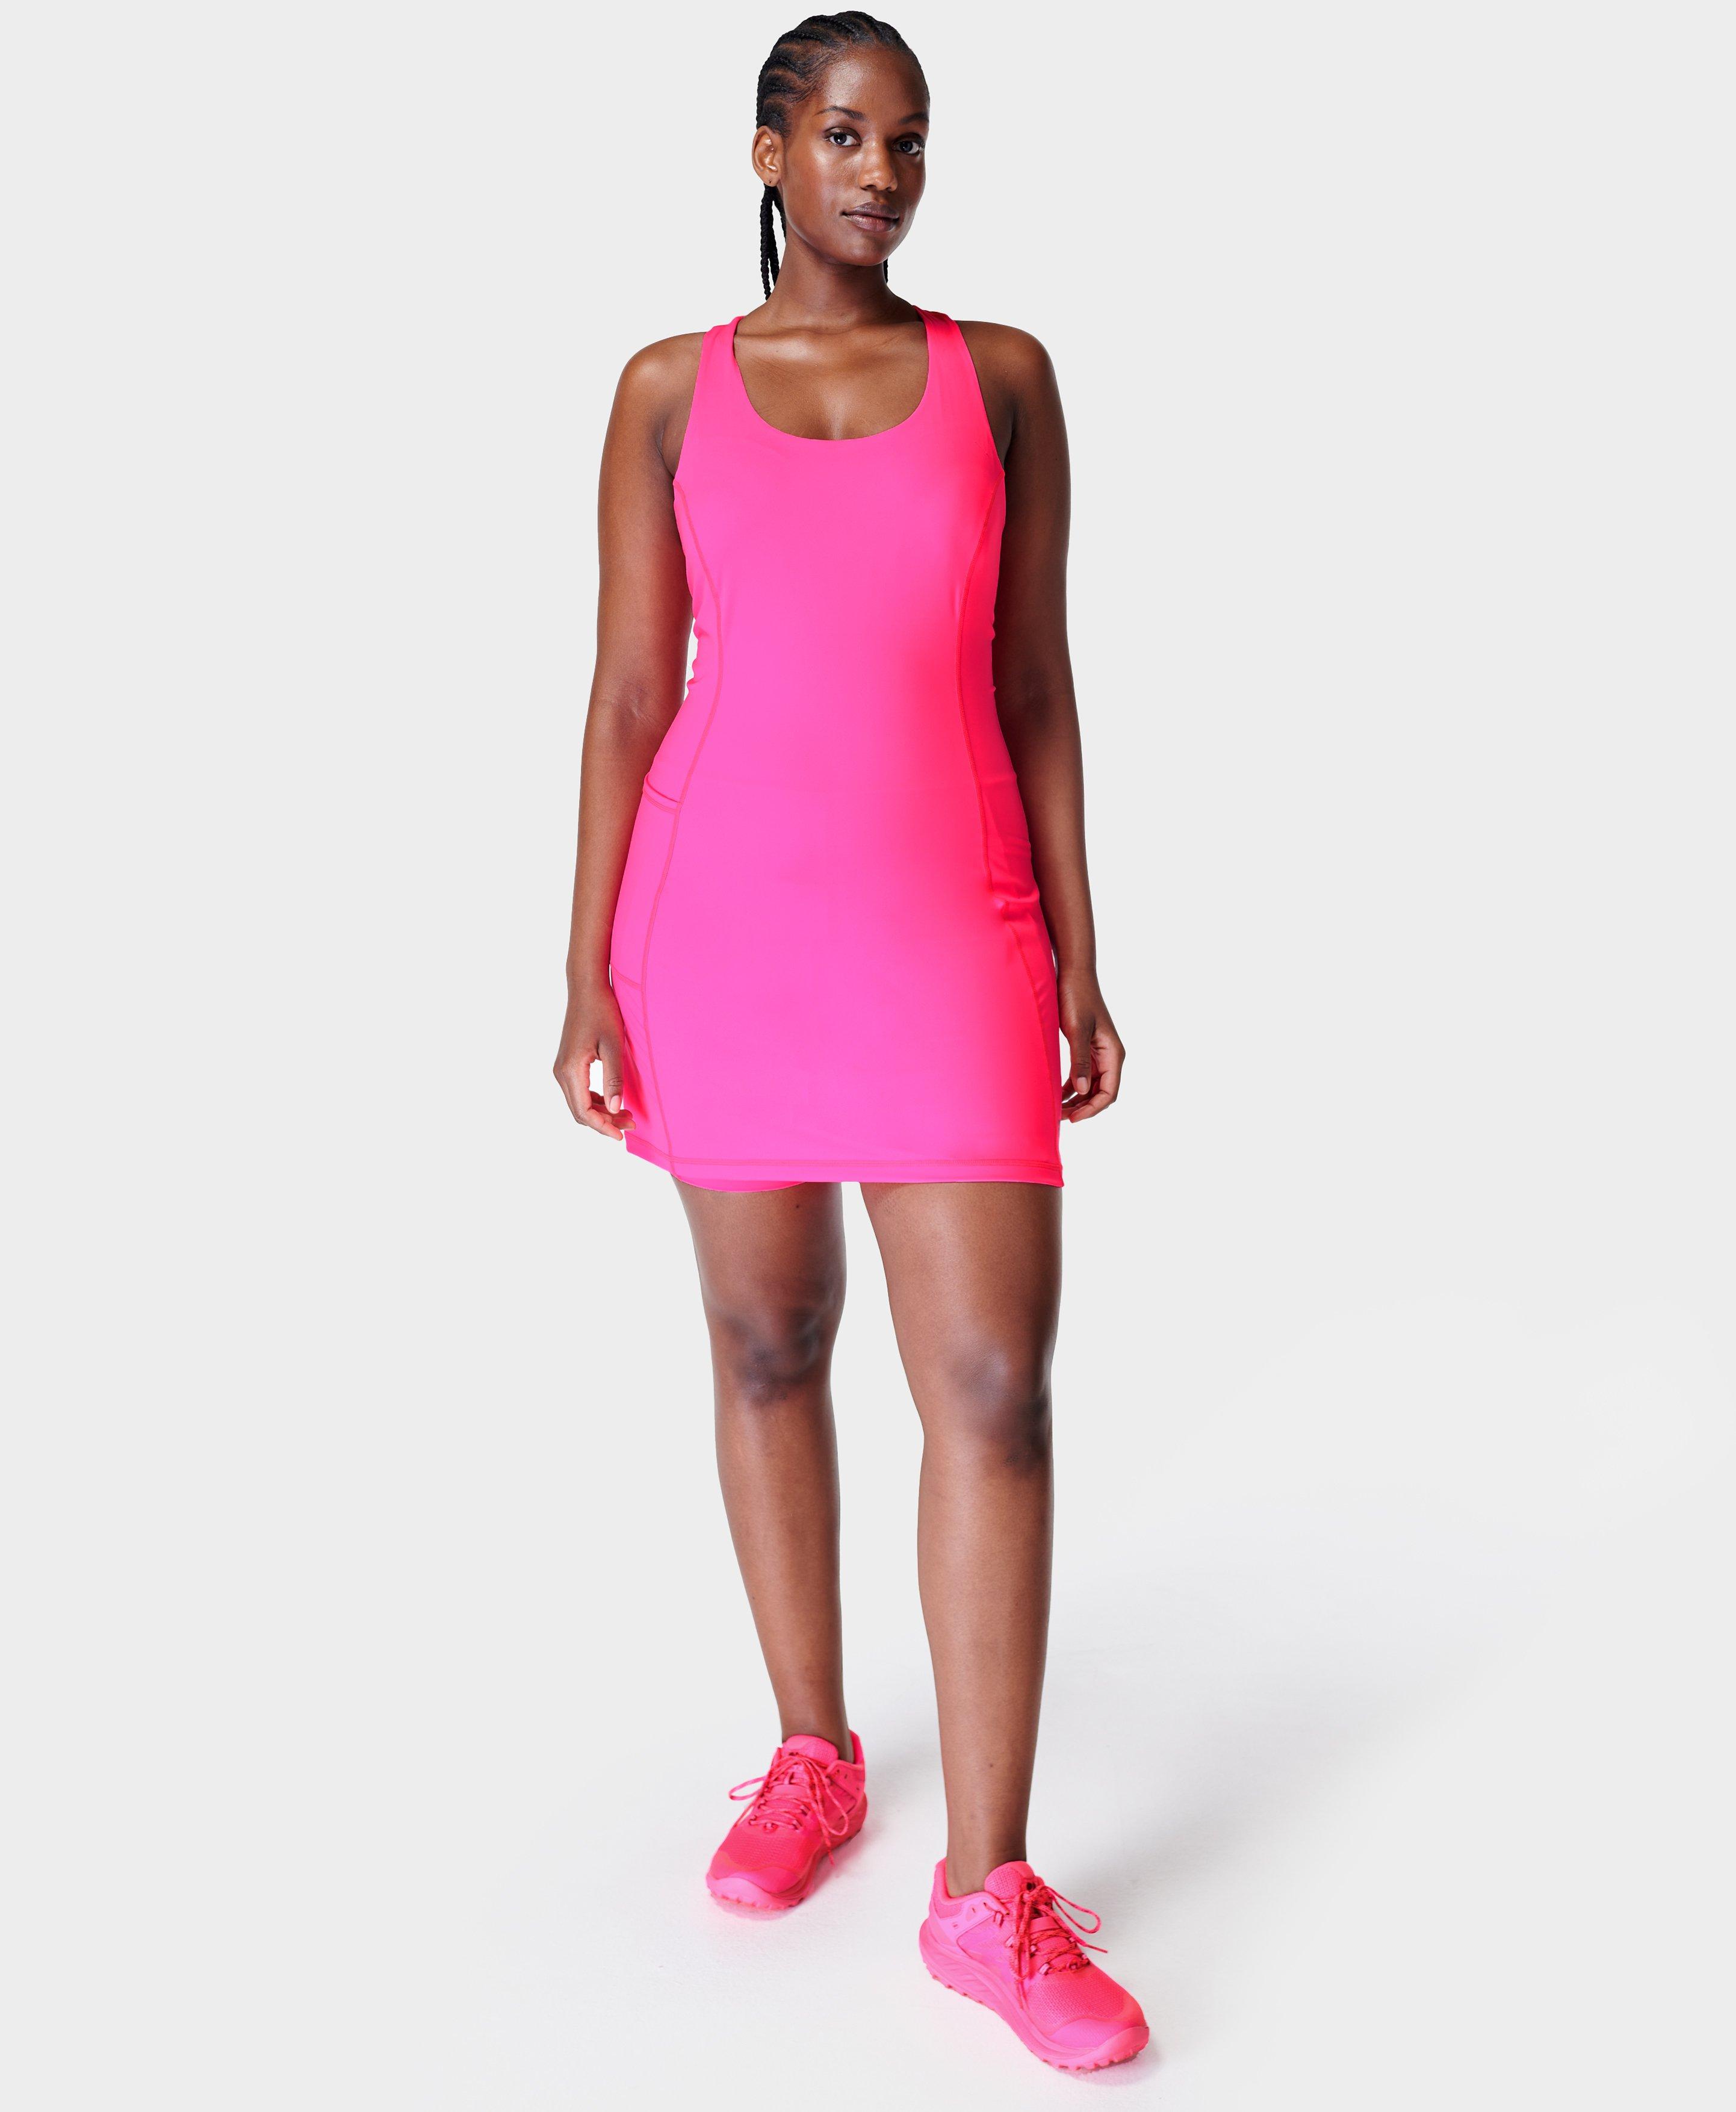 Sweat in Style Athletic Romper in Hot Pink - Frock Candy